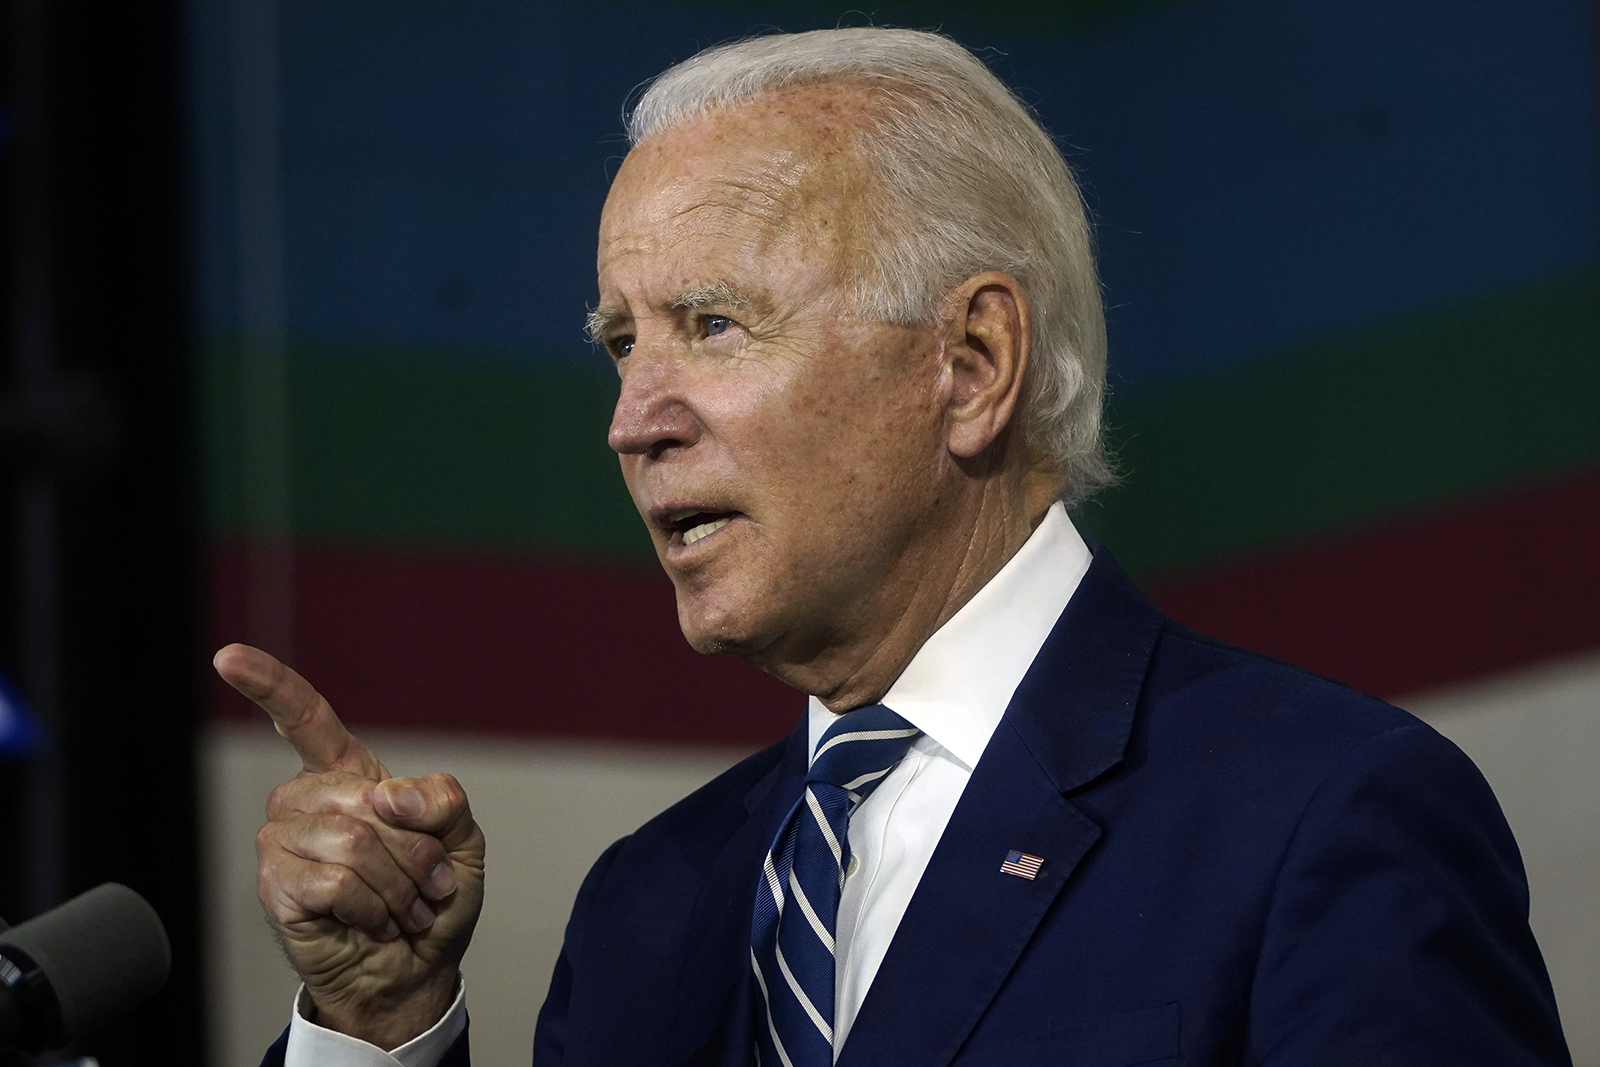 Democratic presidential candidate former Vice President Joe Biden speaks about economic recovery during a campaign event at Colonial Early Education Program at the Colwyck Center on July 21 in New Castle, Delaware.